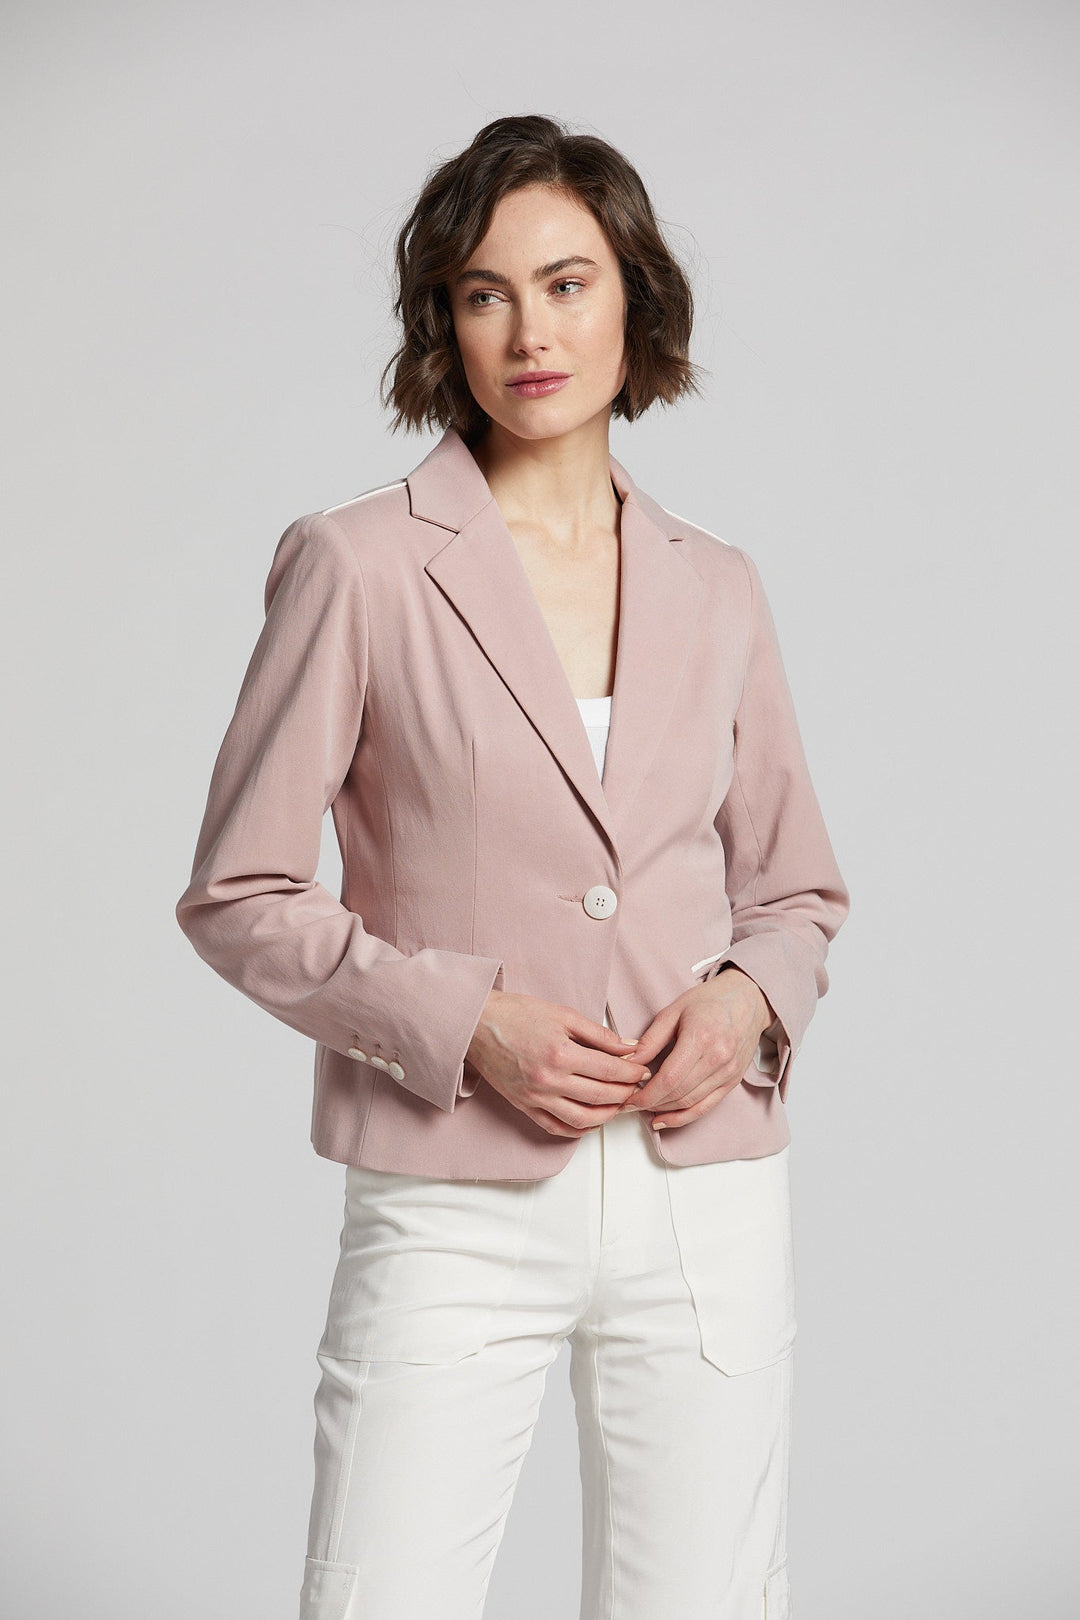 Noa Single Breasted Stretch Blazer With Piping - Blush/White